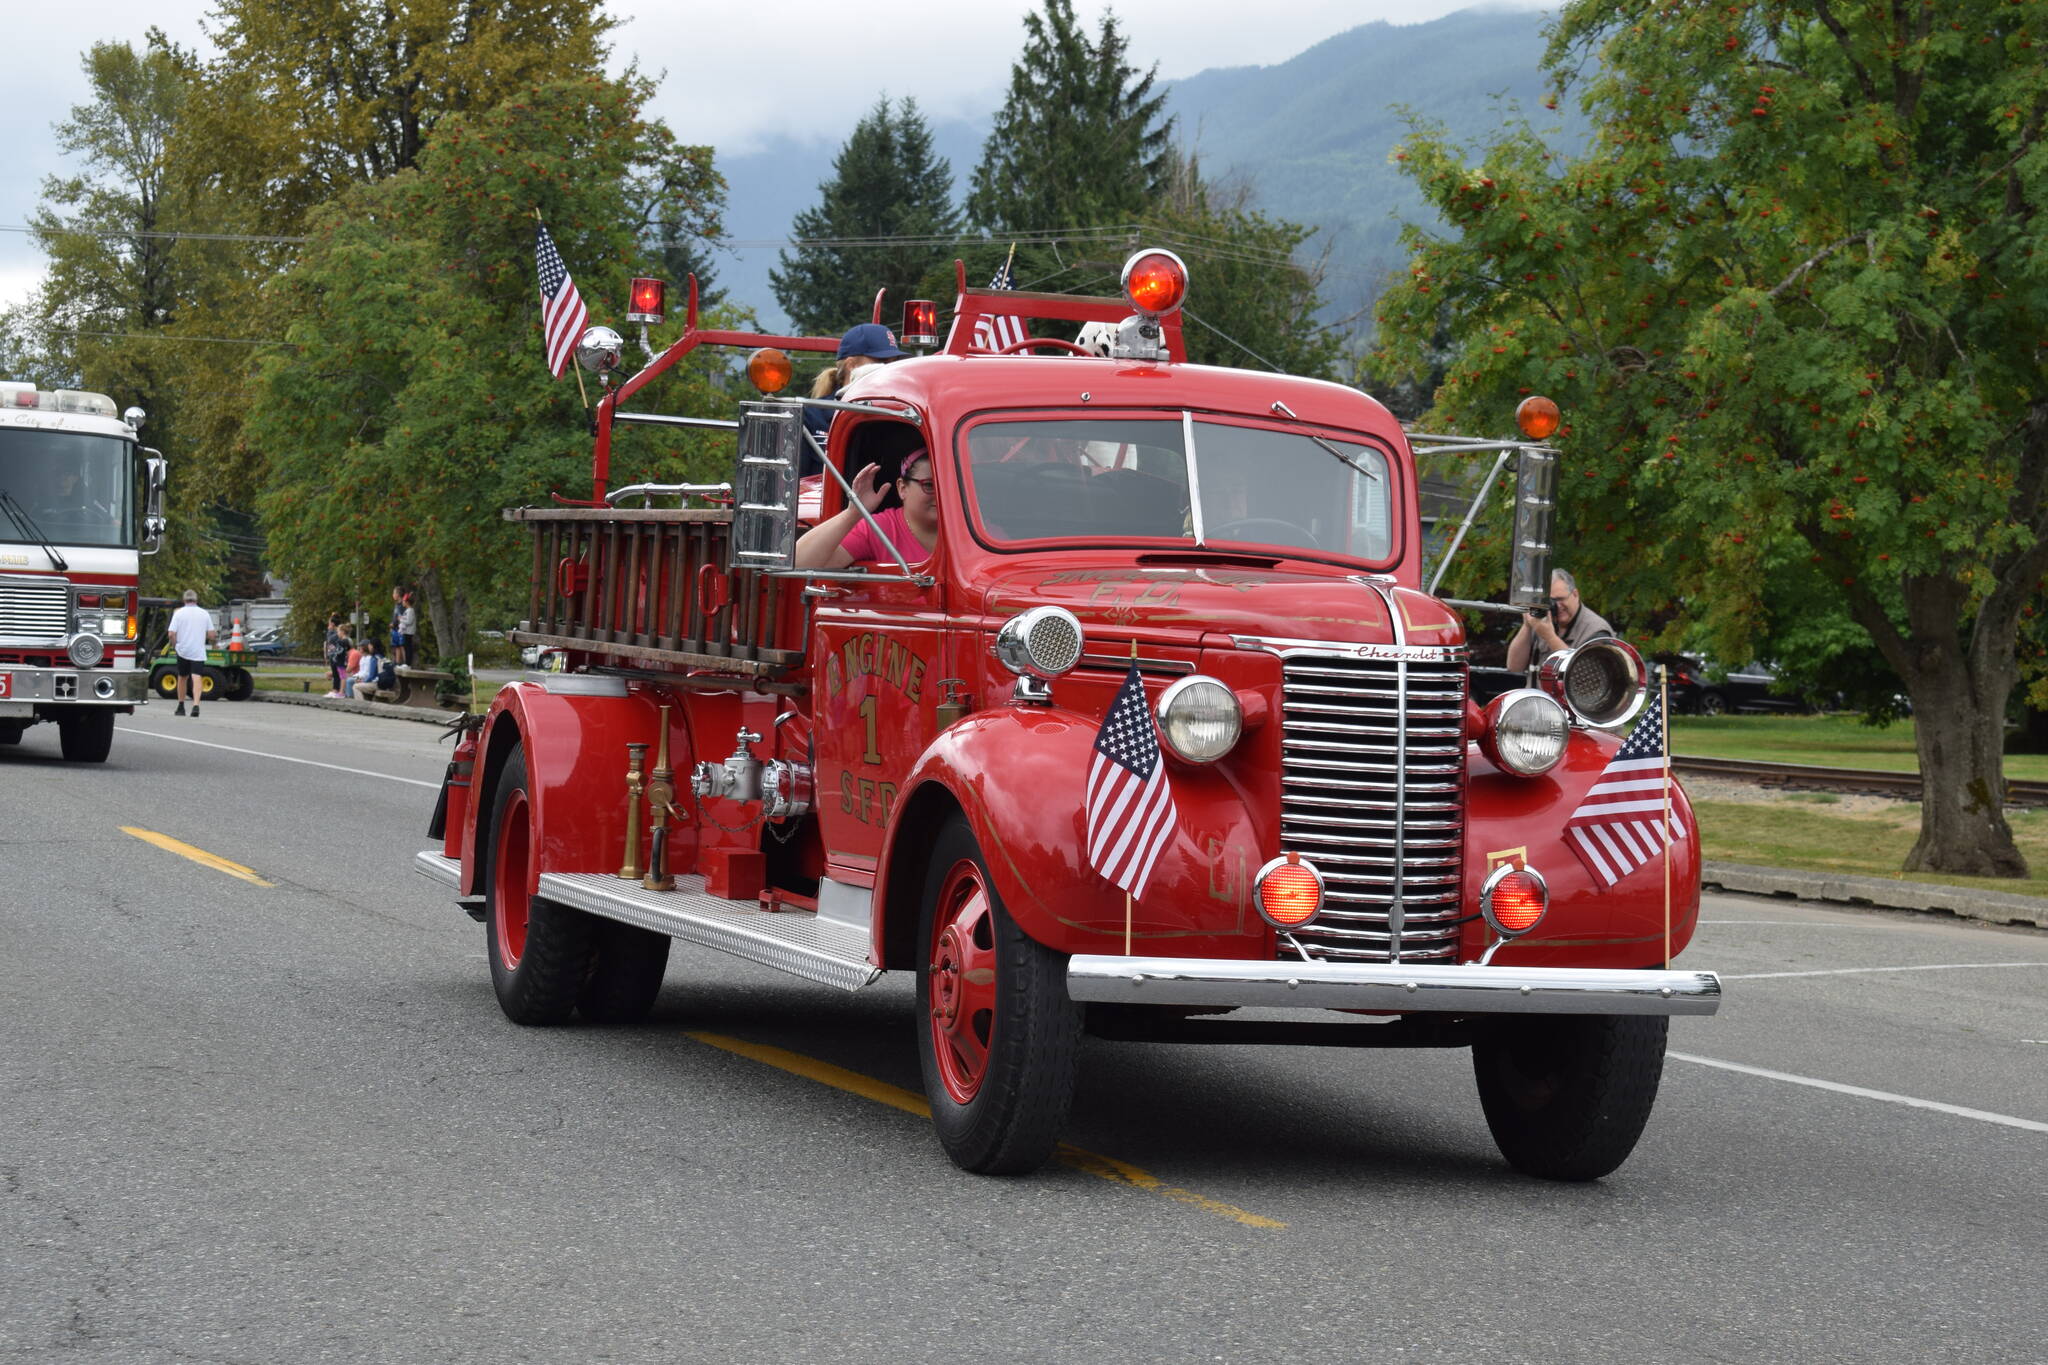 A Snoqualmie Fire Truck. Courtesy photo.